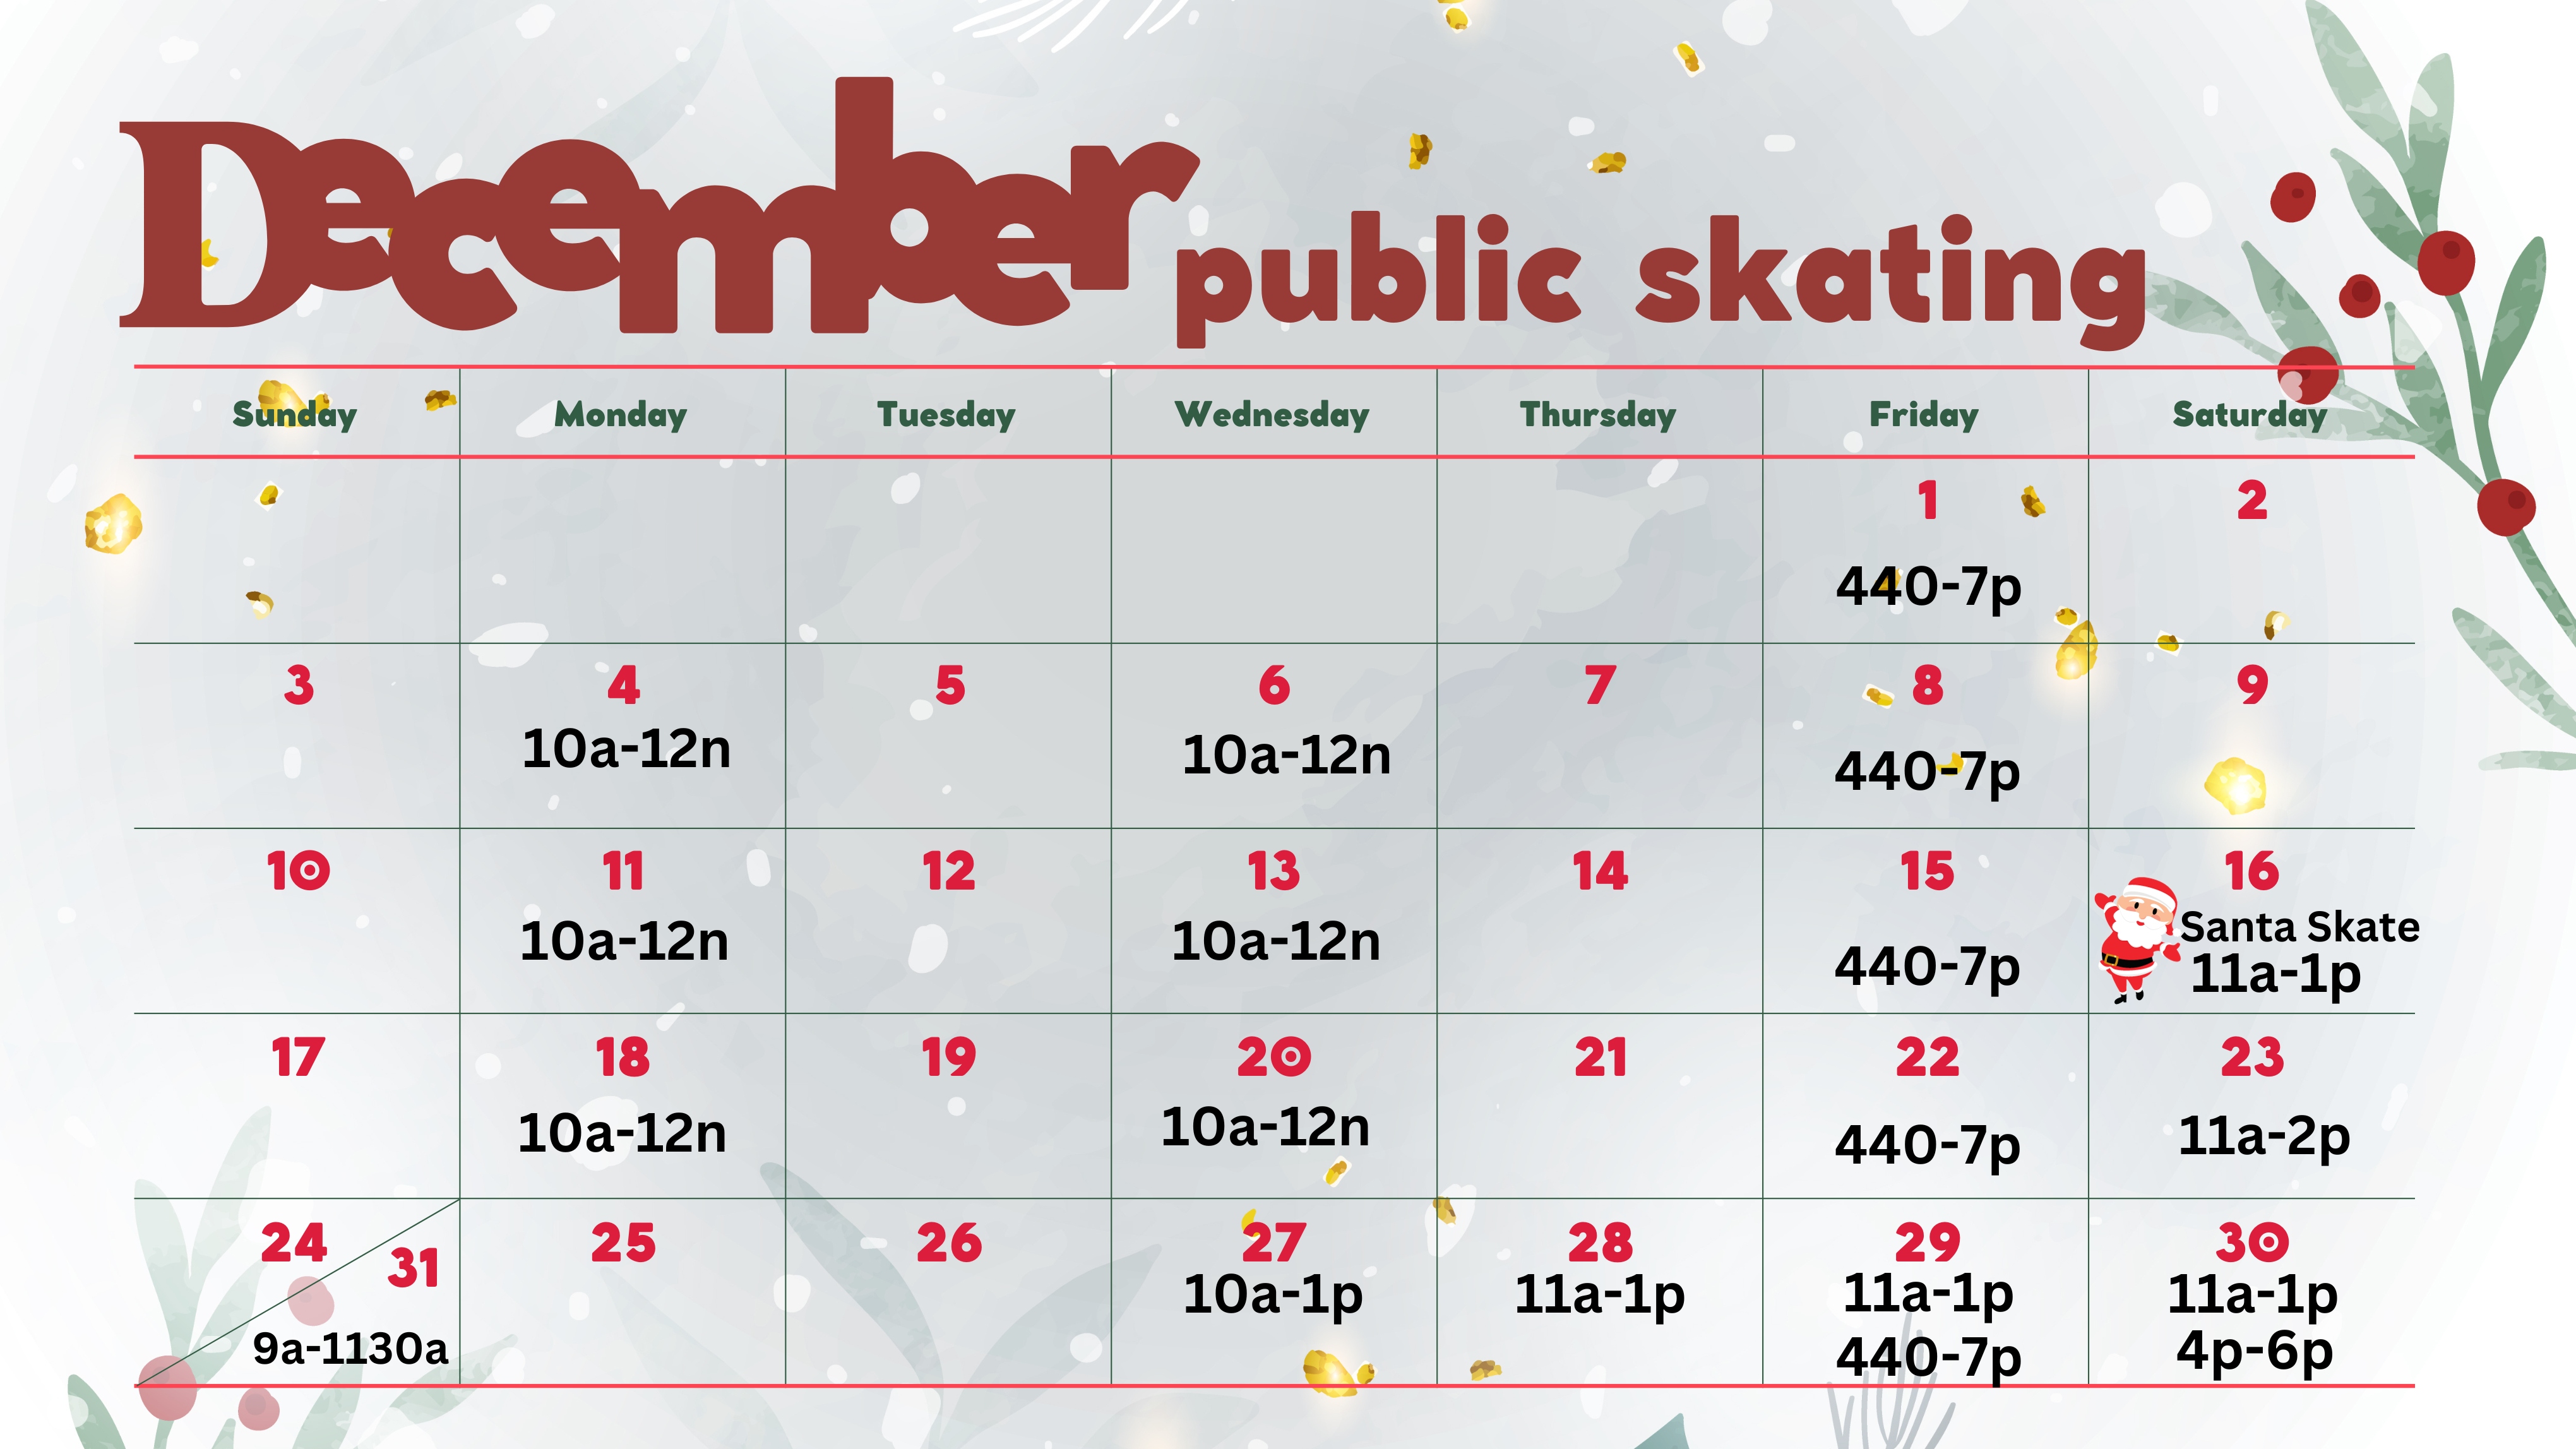 Public Skating schedule and picture of a snow globe with a snowman inside